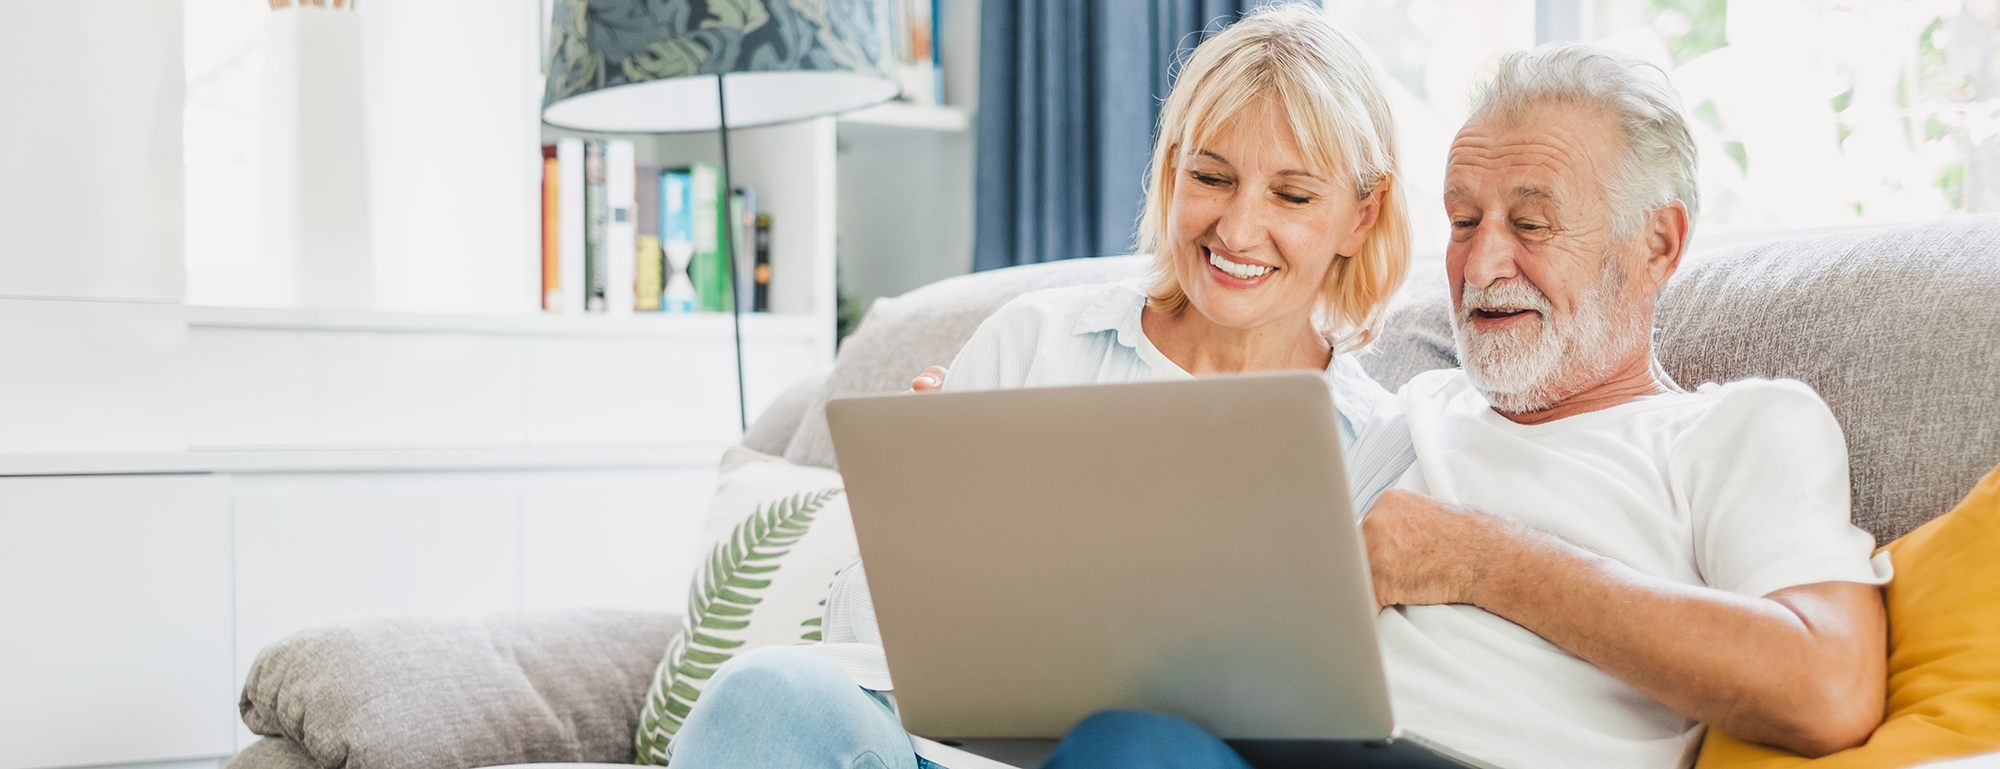 older couple sitting on a sofa smiling looking at a laptop  | Ultimate guide to Essential digital skills | Digital Wings blog